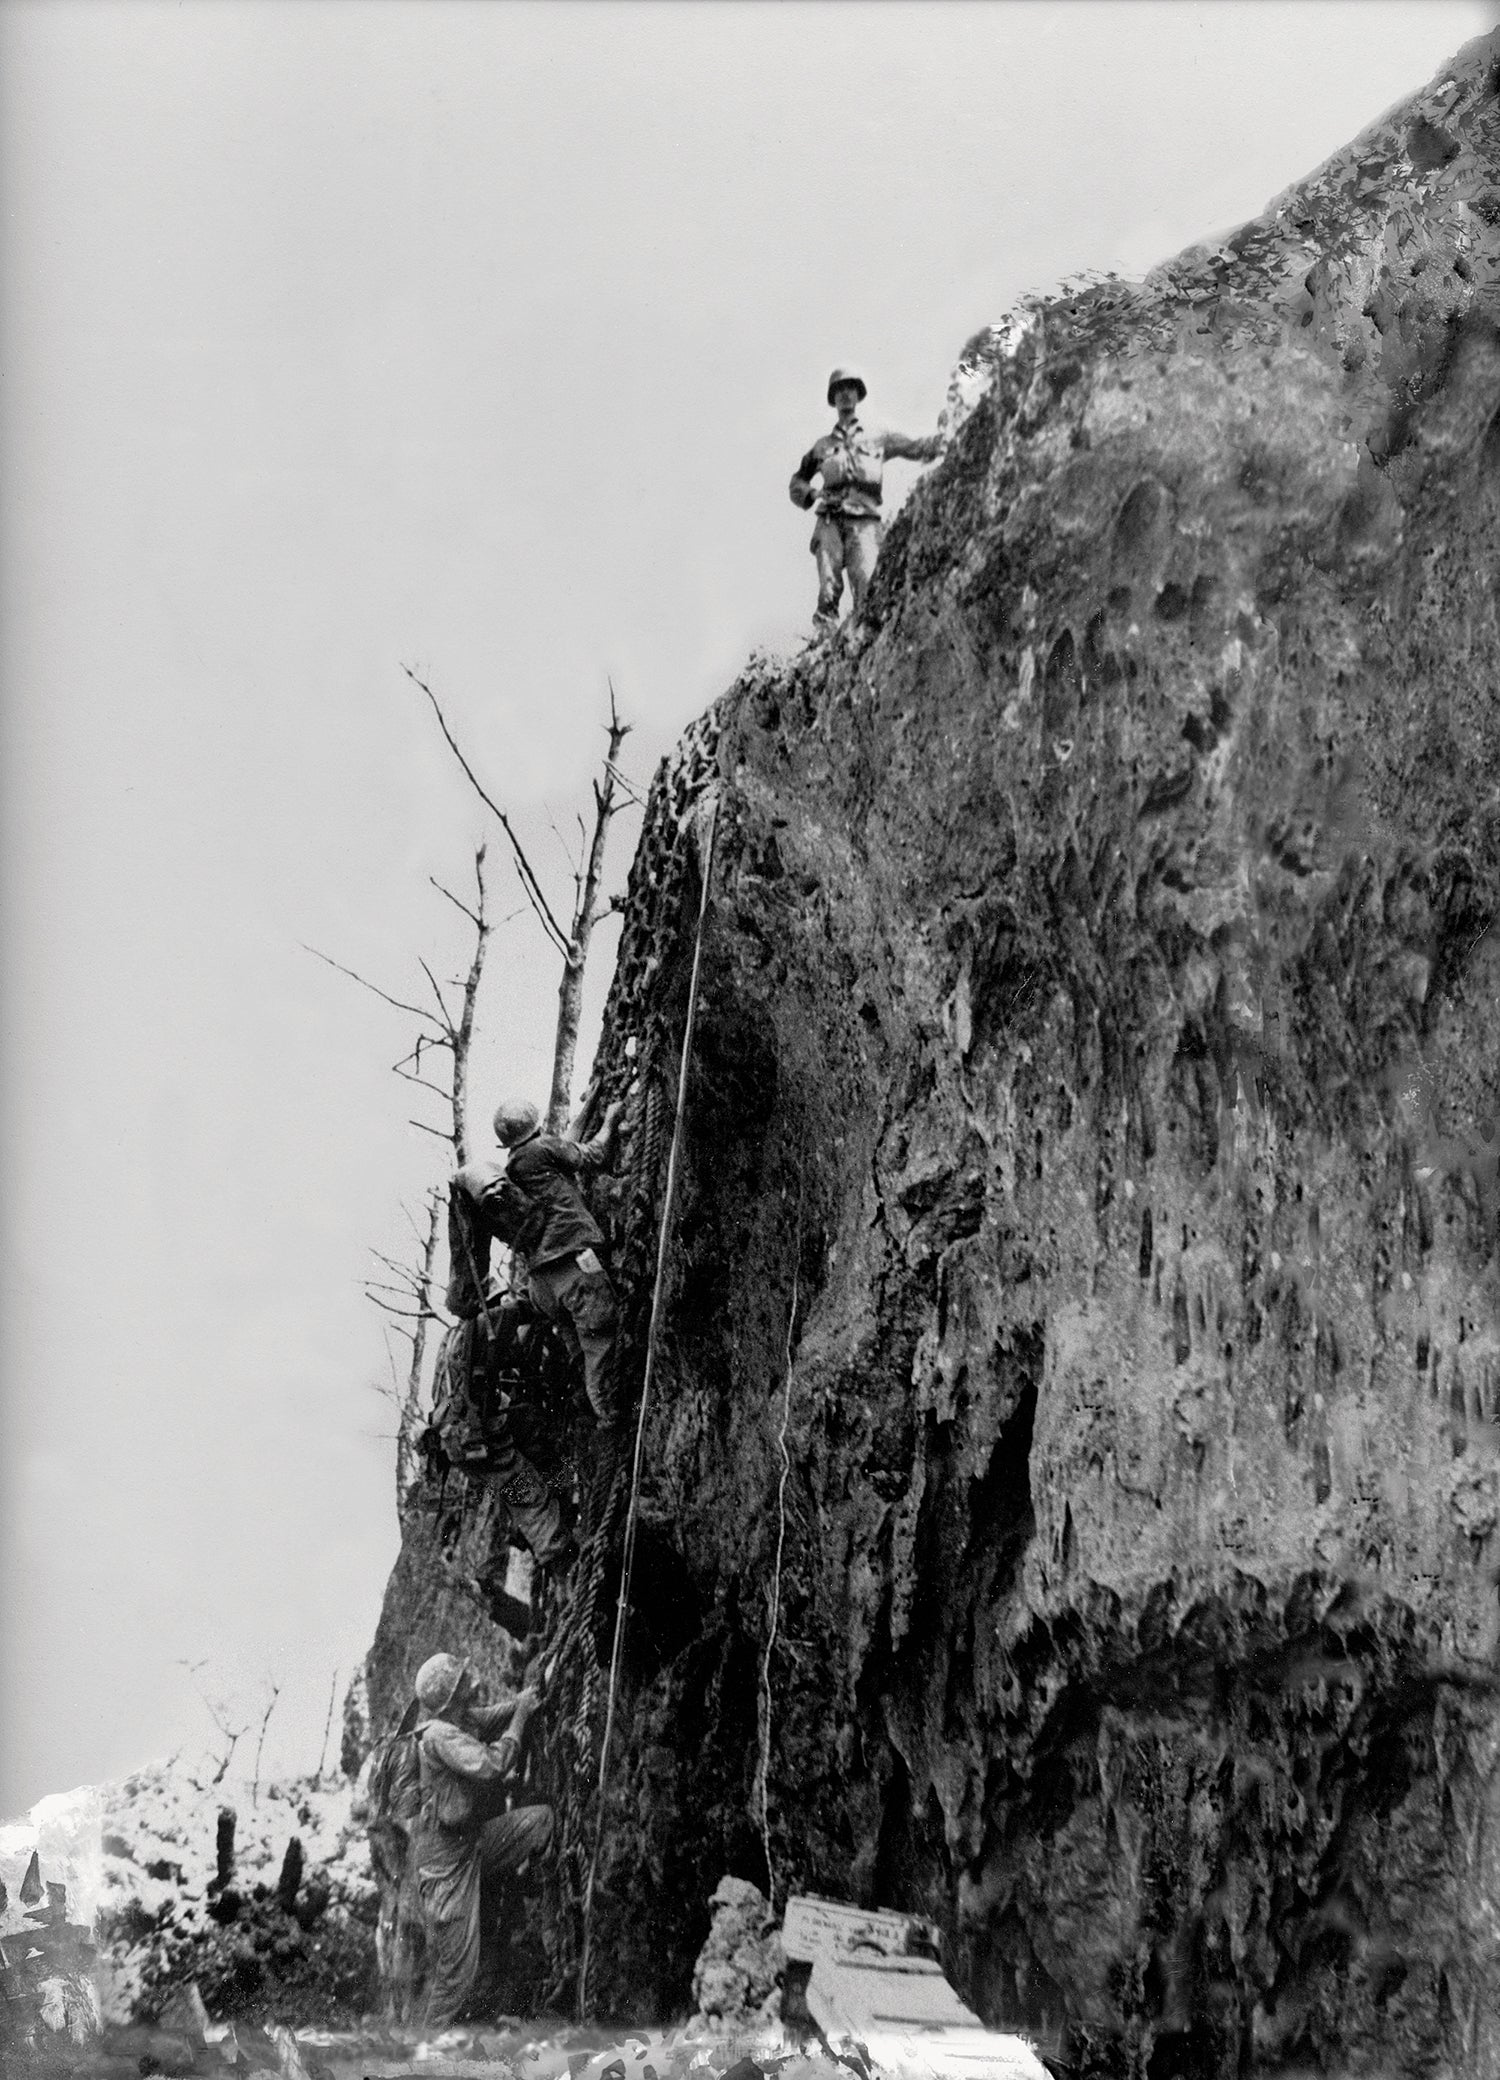 Then-Pfc. Doss stands atop Okinawa’s Maeda Escarpment on May 4, 1945, where he is credited with helping save the lives of up to 100 U.S. troops. (Credit: Wikipedia)